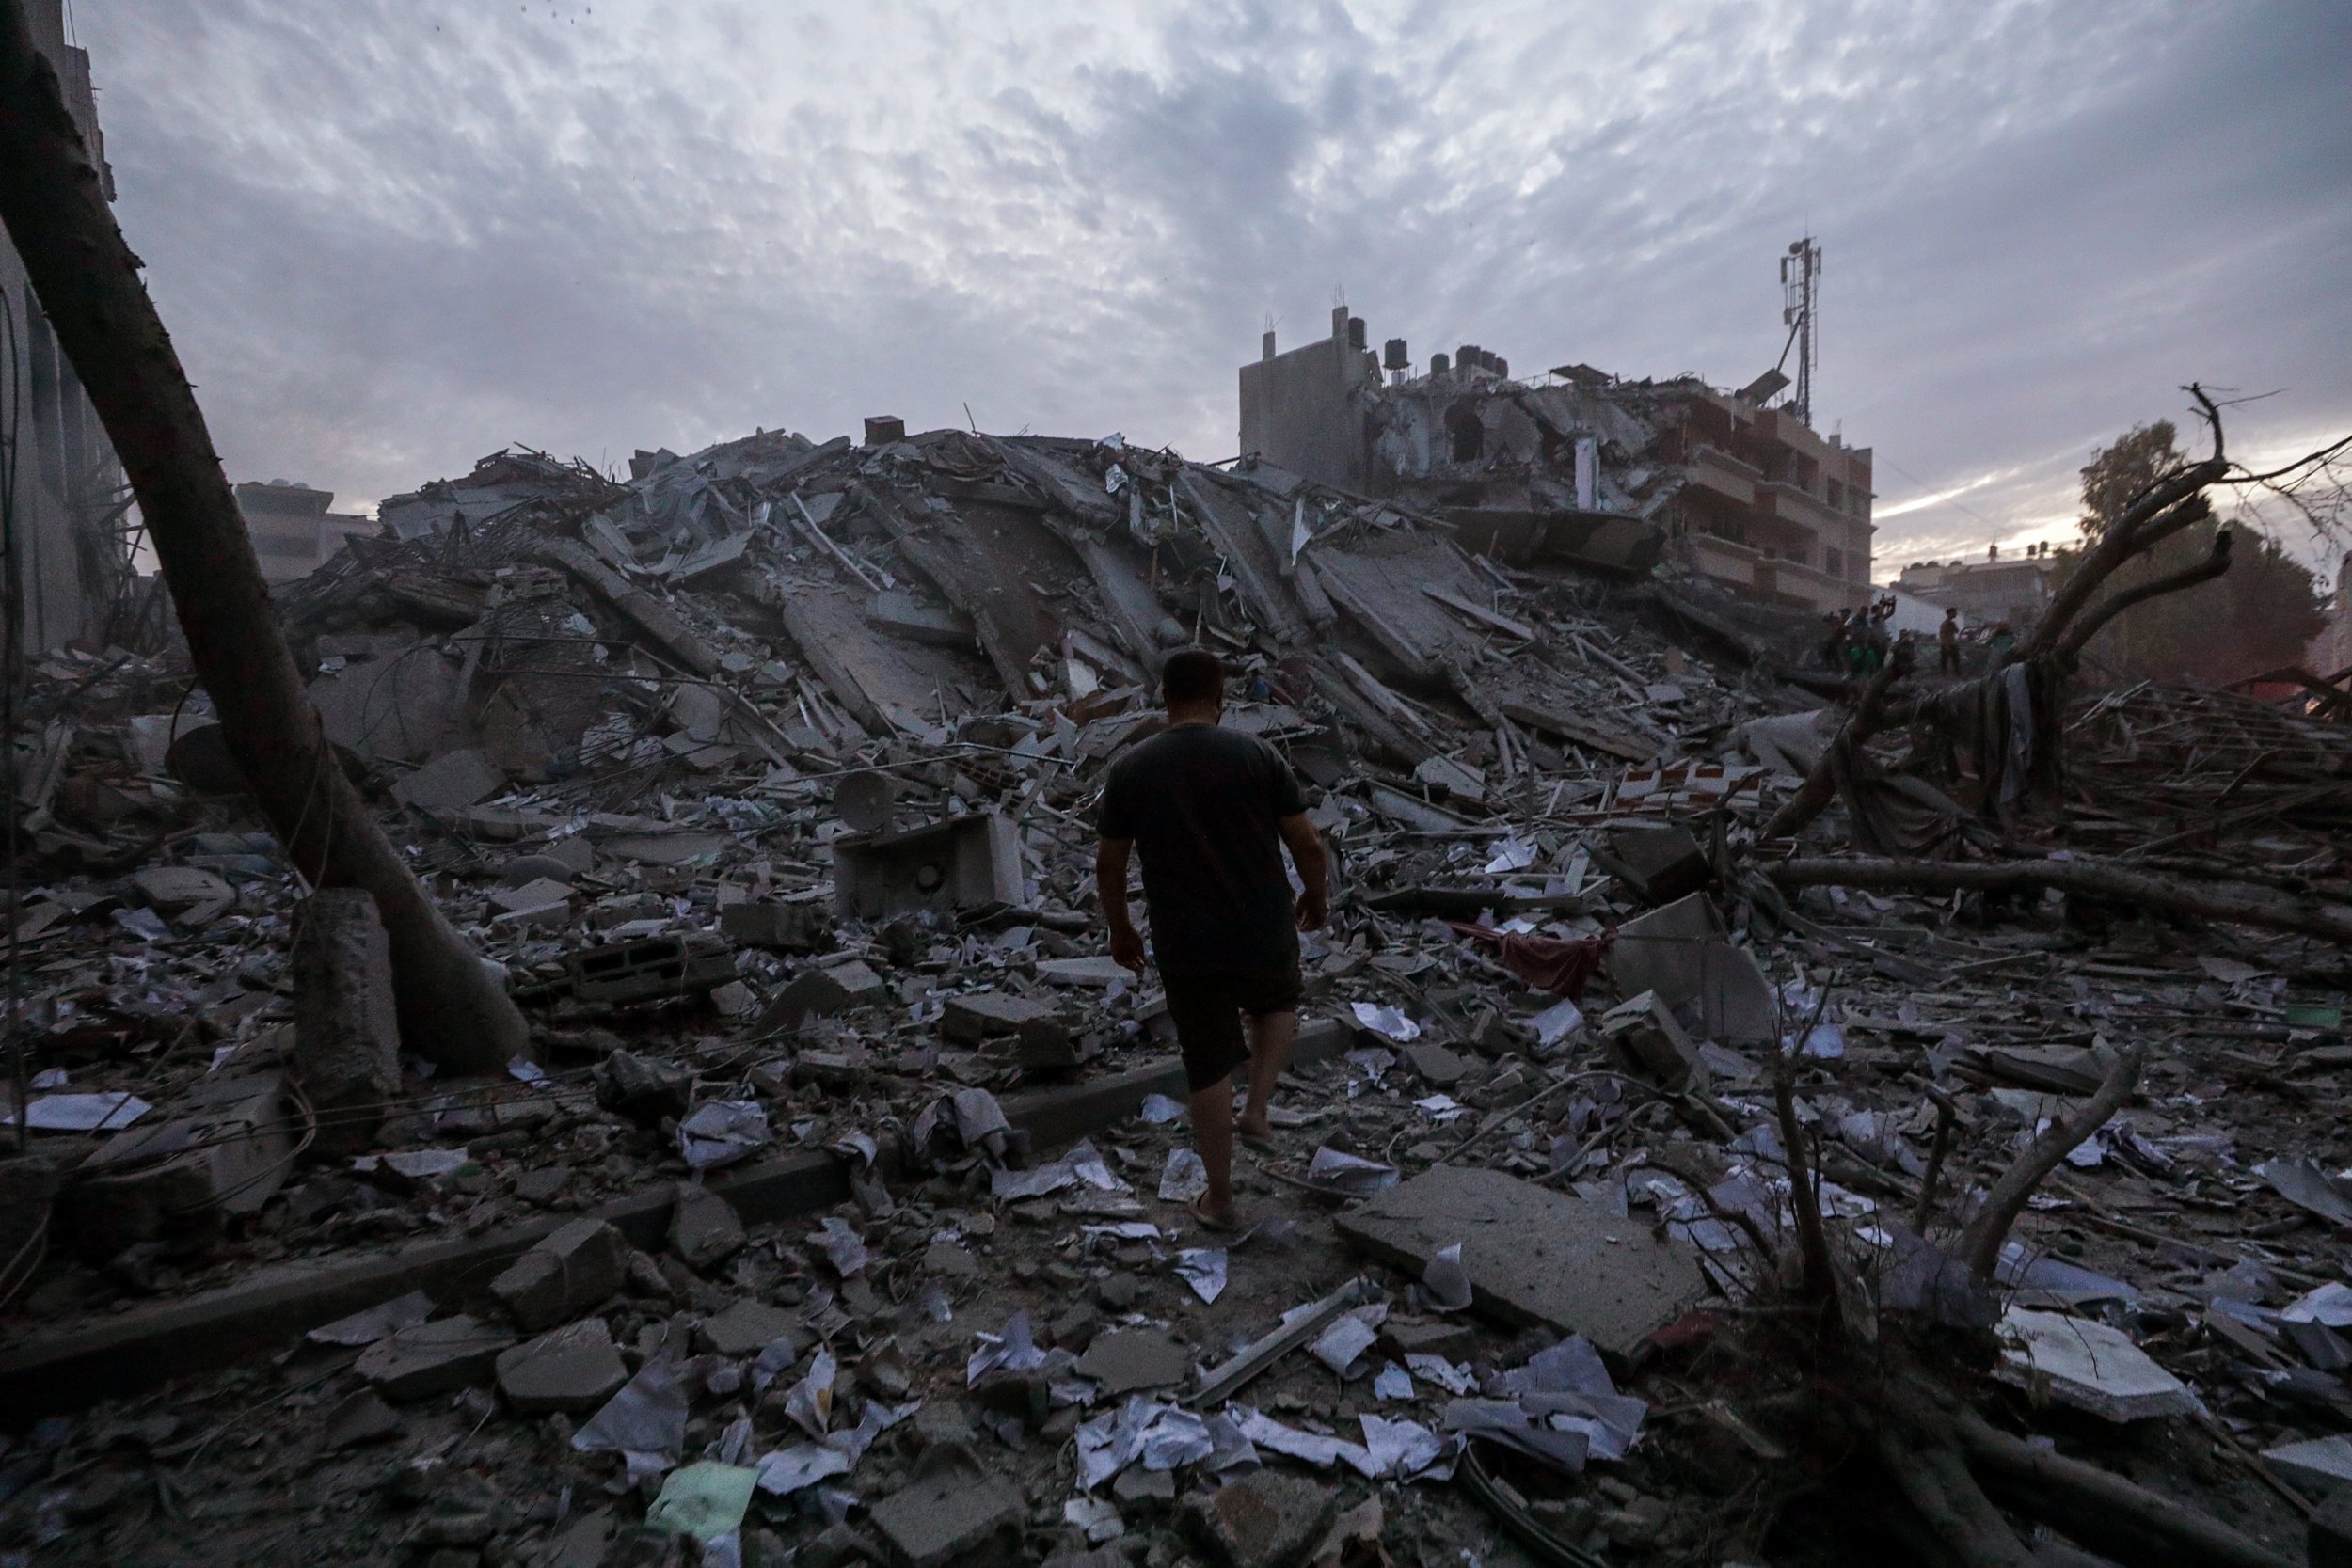 The Palestine Tower was left in ruins after Israeli warplanes targeted late yesterday